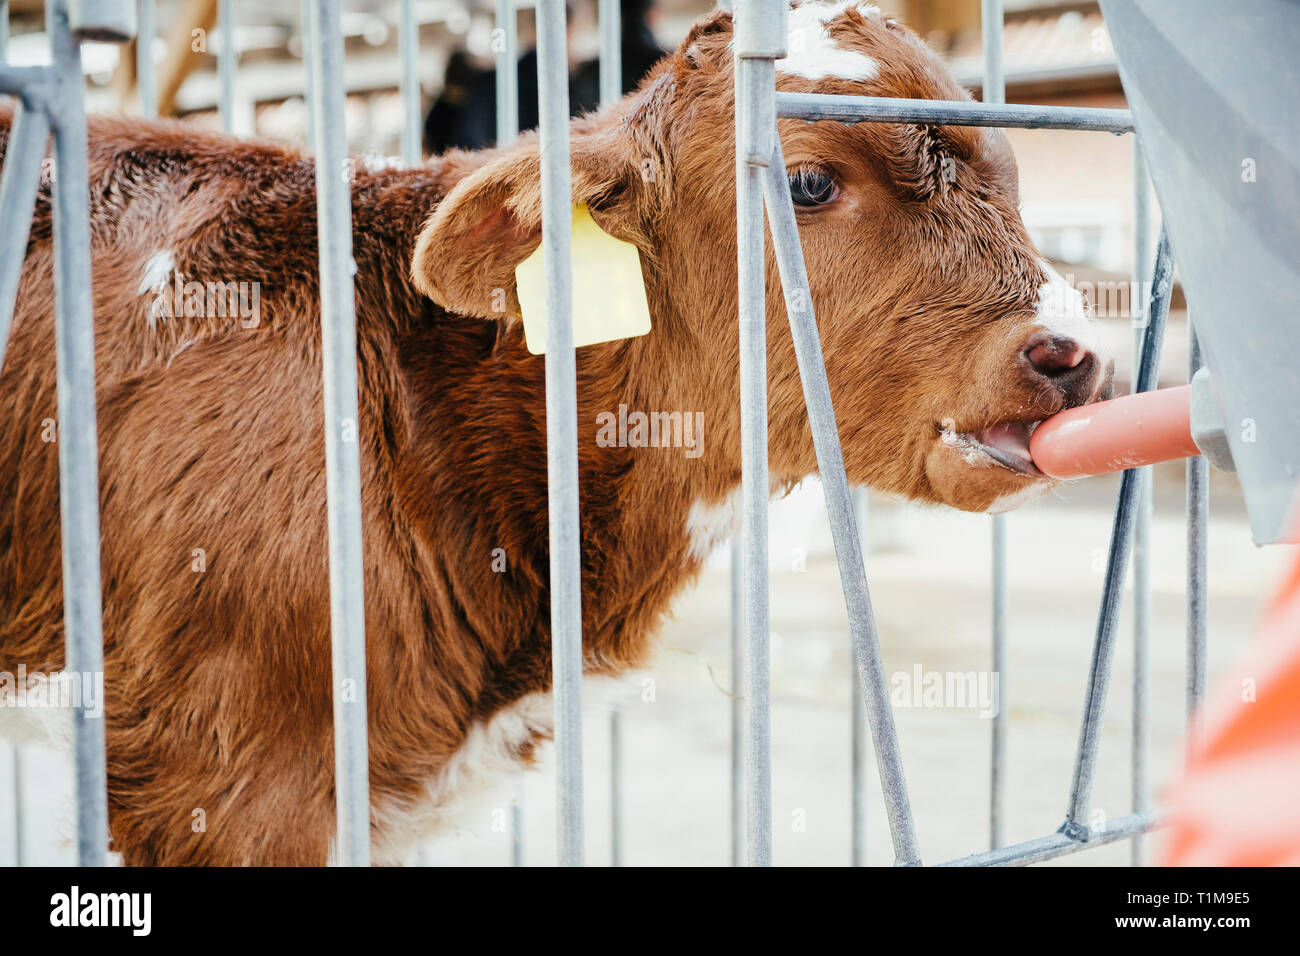 Close up cow calf drinking from nozzle Stock Photo